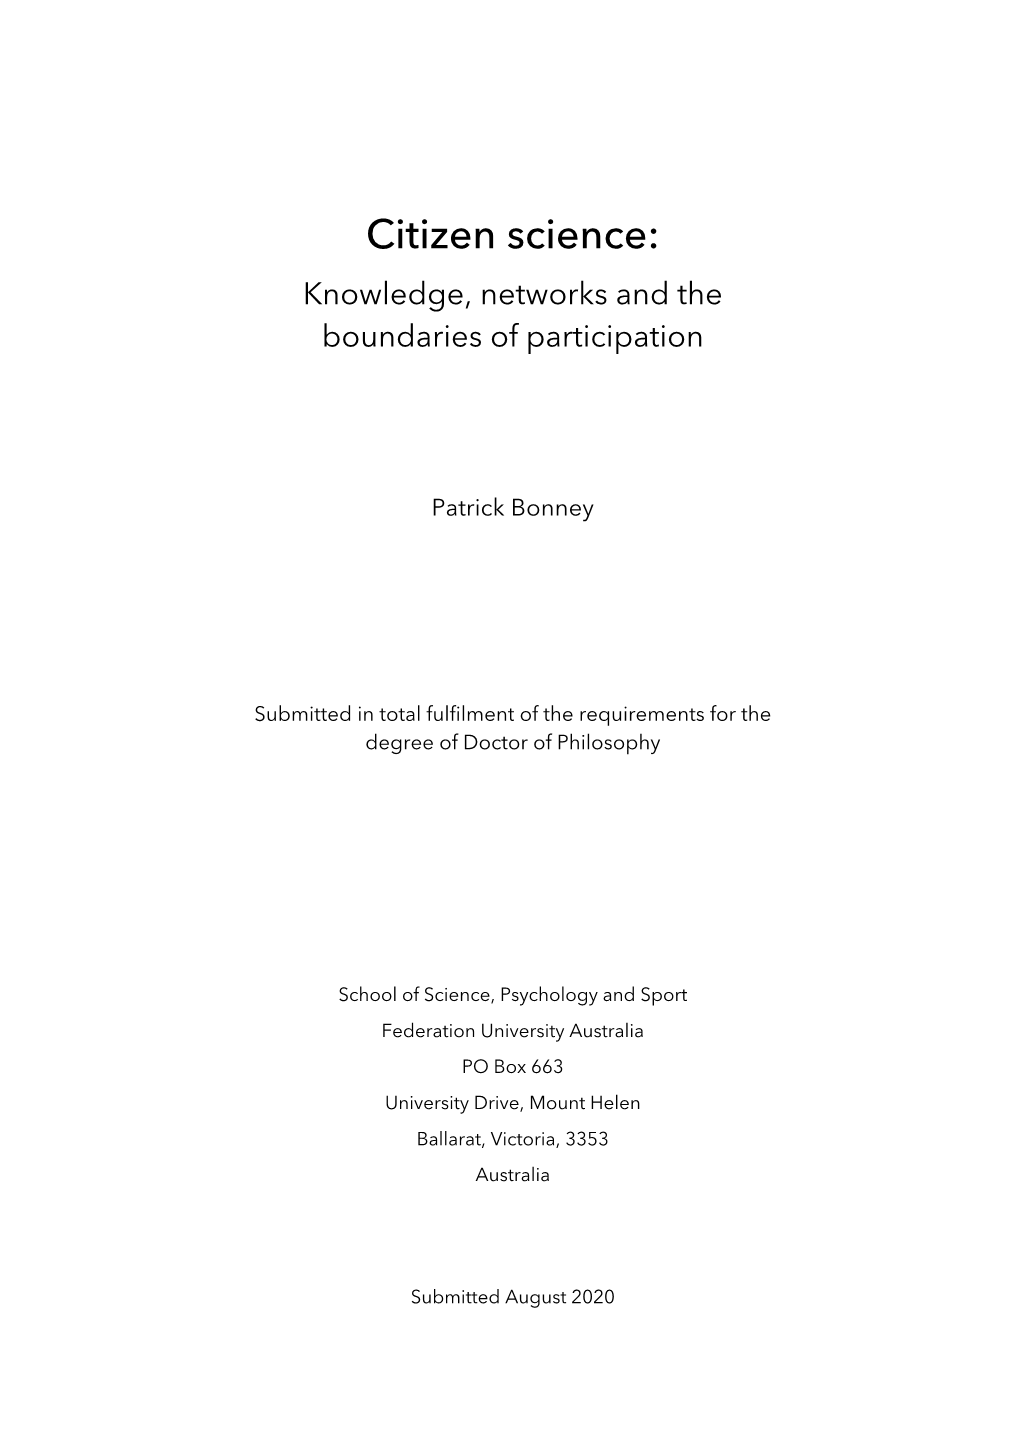 Citizen Science: Knowledge, Networks and the Boundaries of Participation